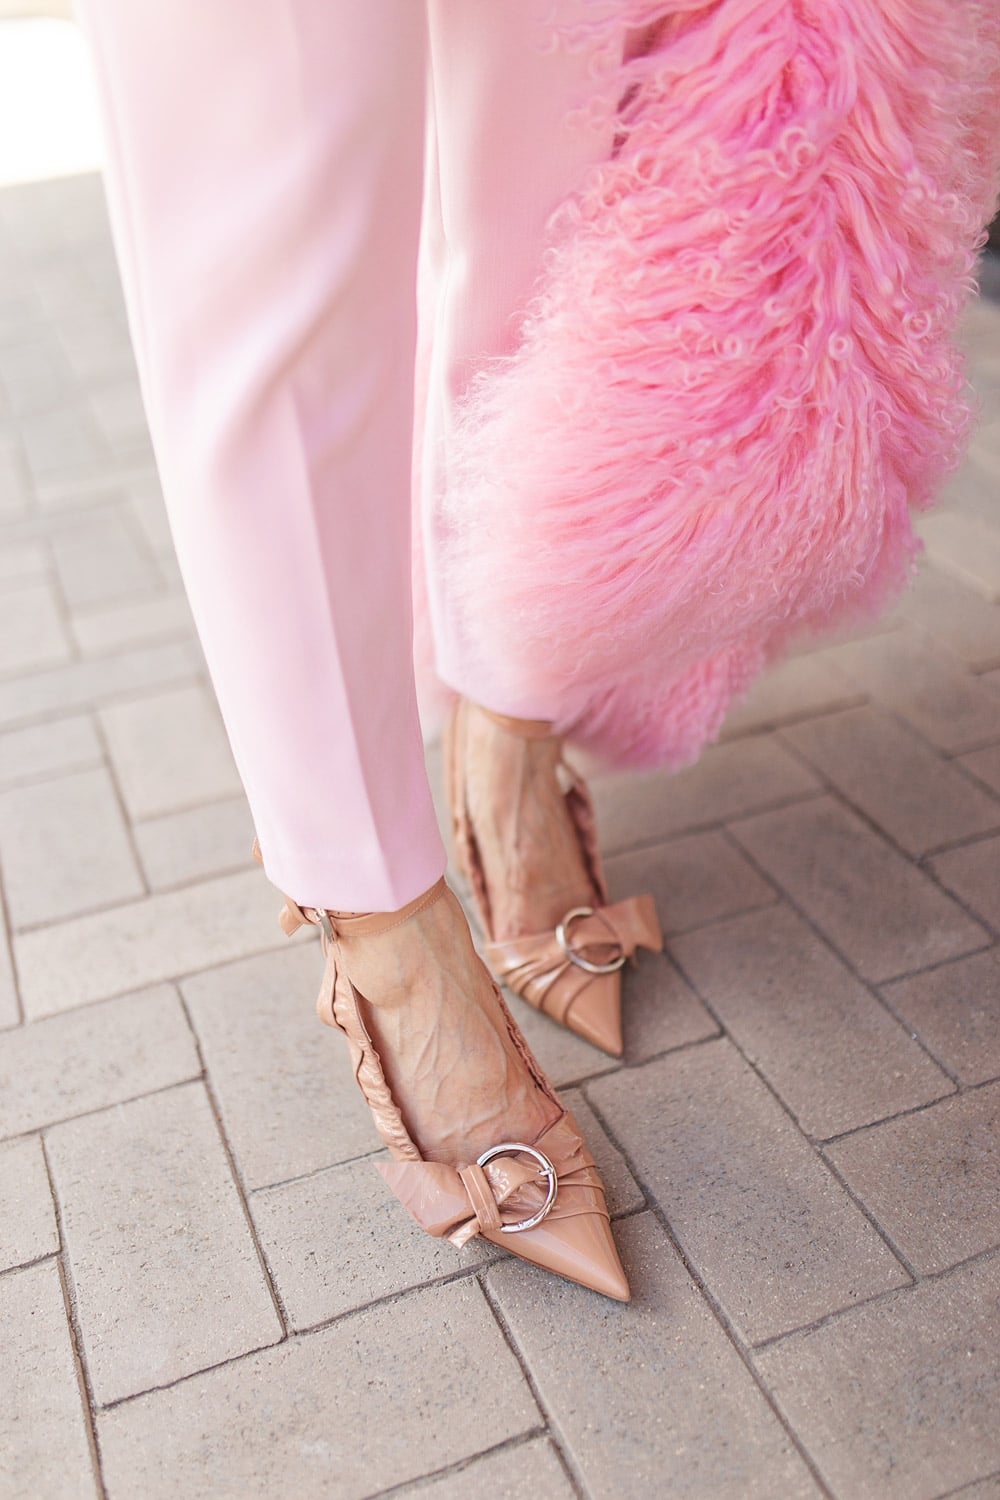 style of sam in dior conquest heels pink fur jacket